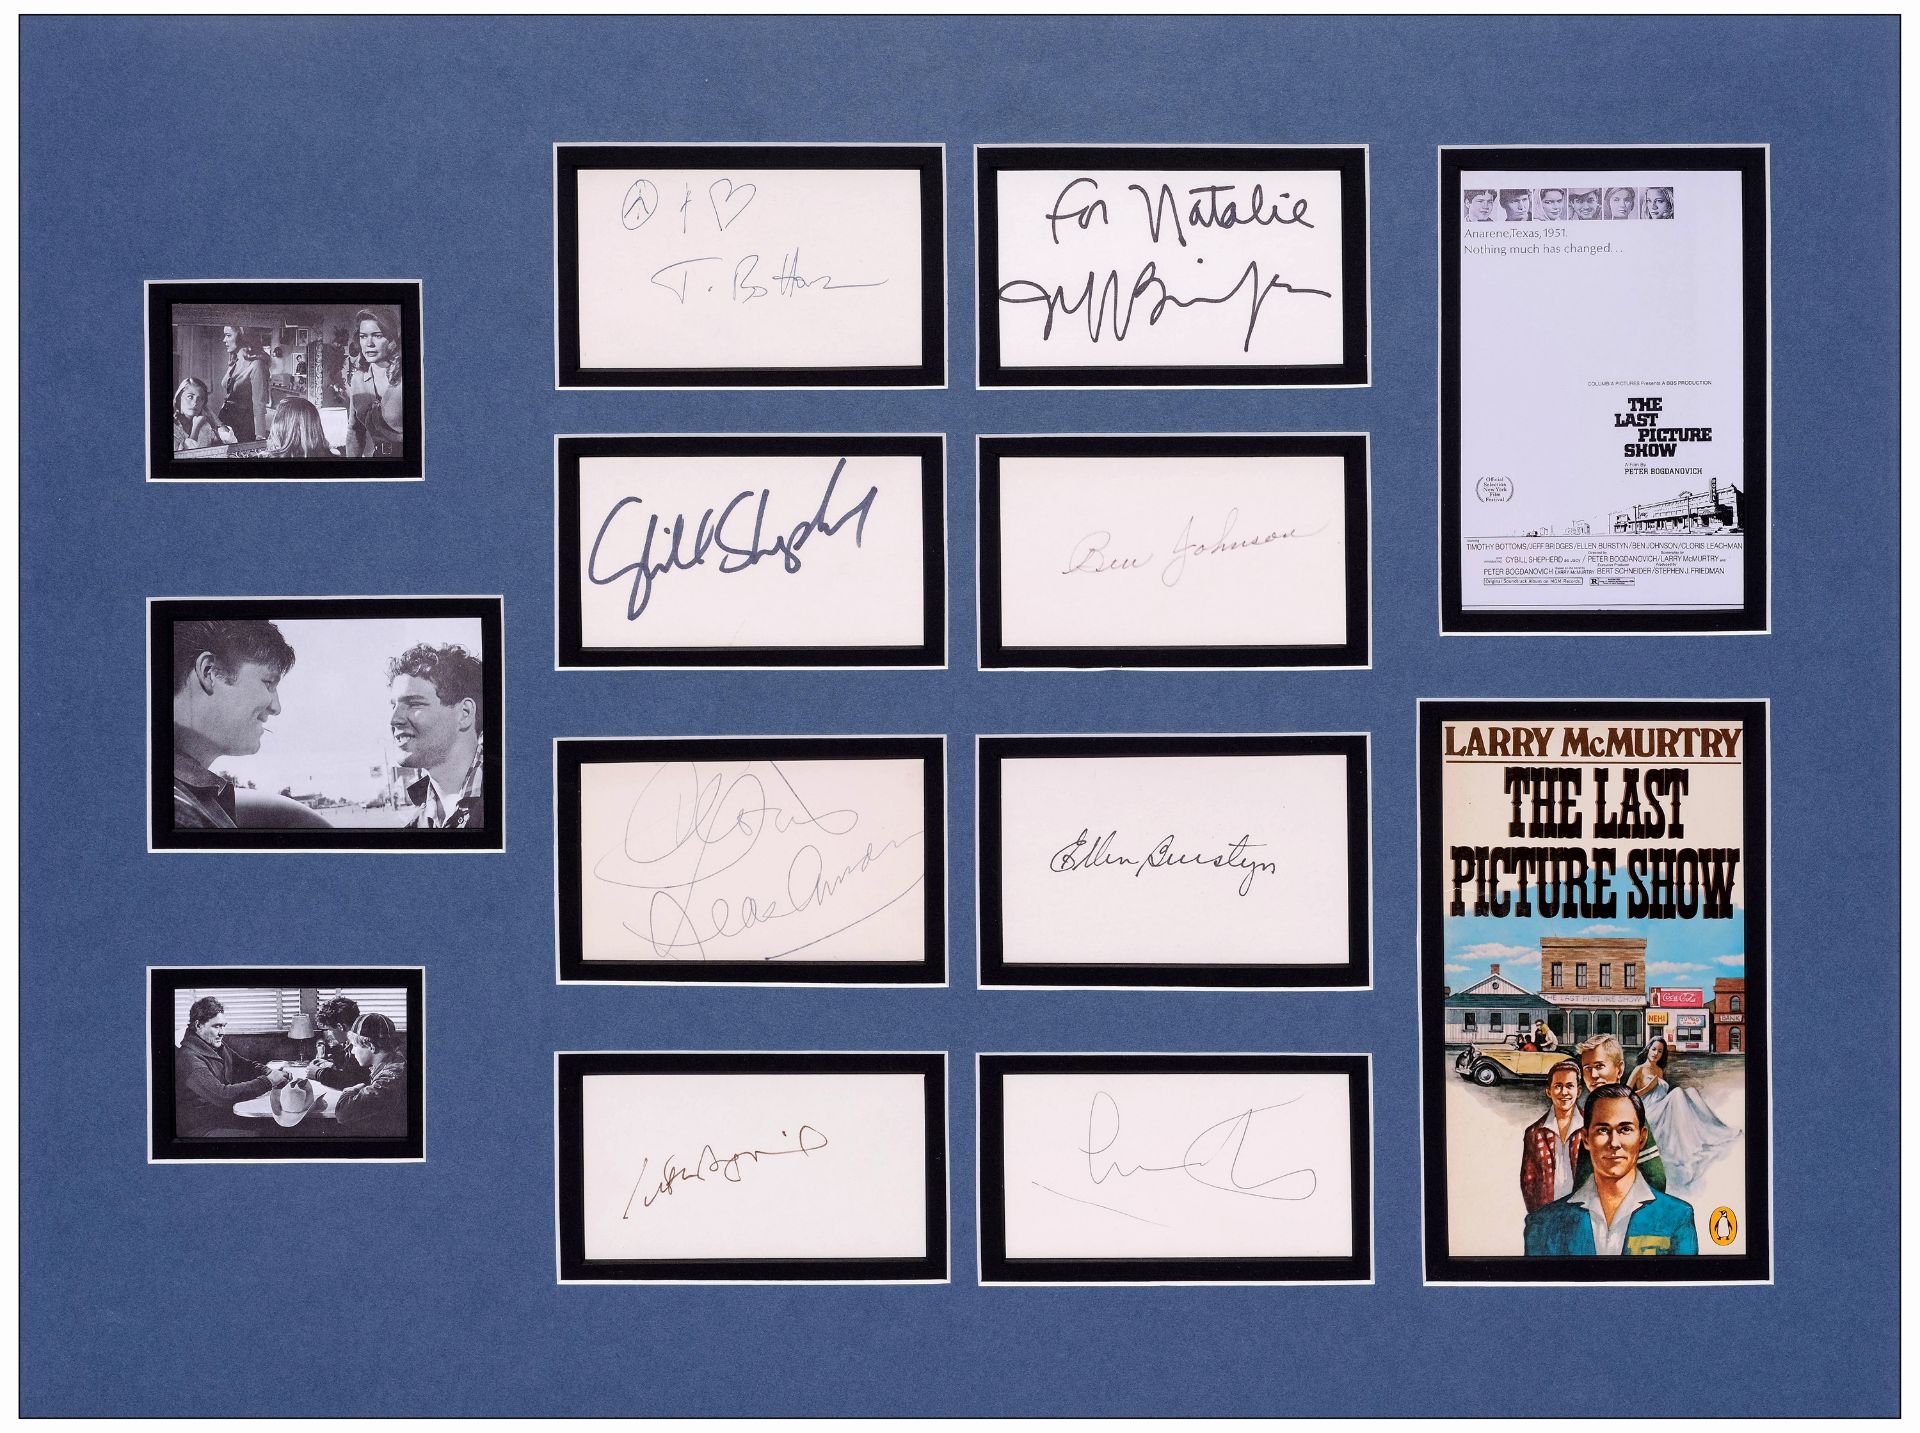 THE LAST PICTURE SHOW - Autographs in Display (24" x 18") Autographed by Timothy Bottoms, Cybill She